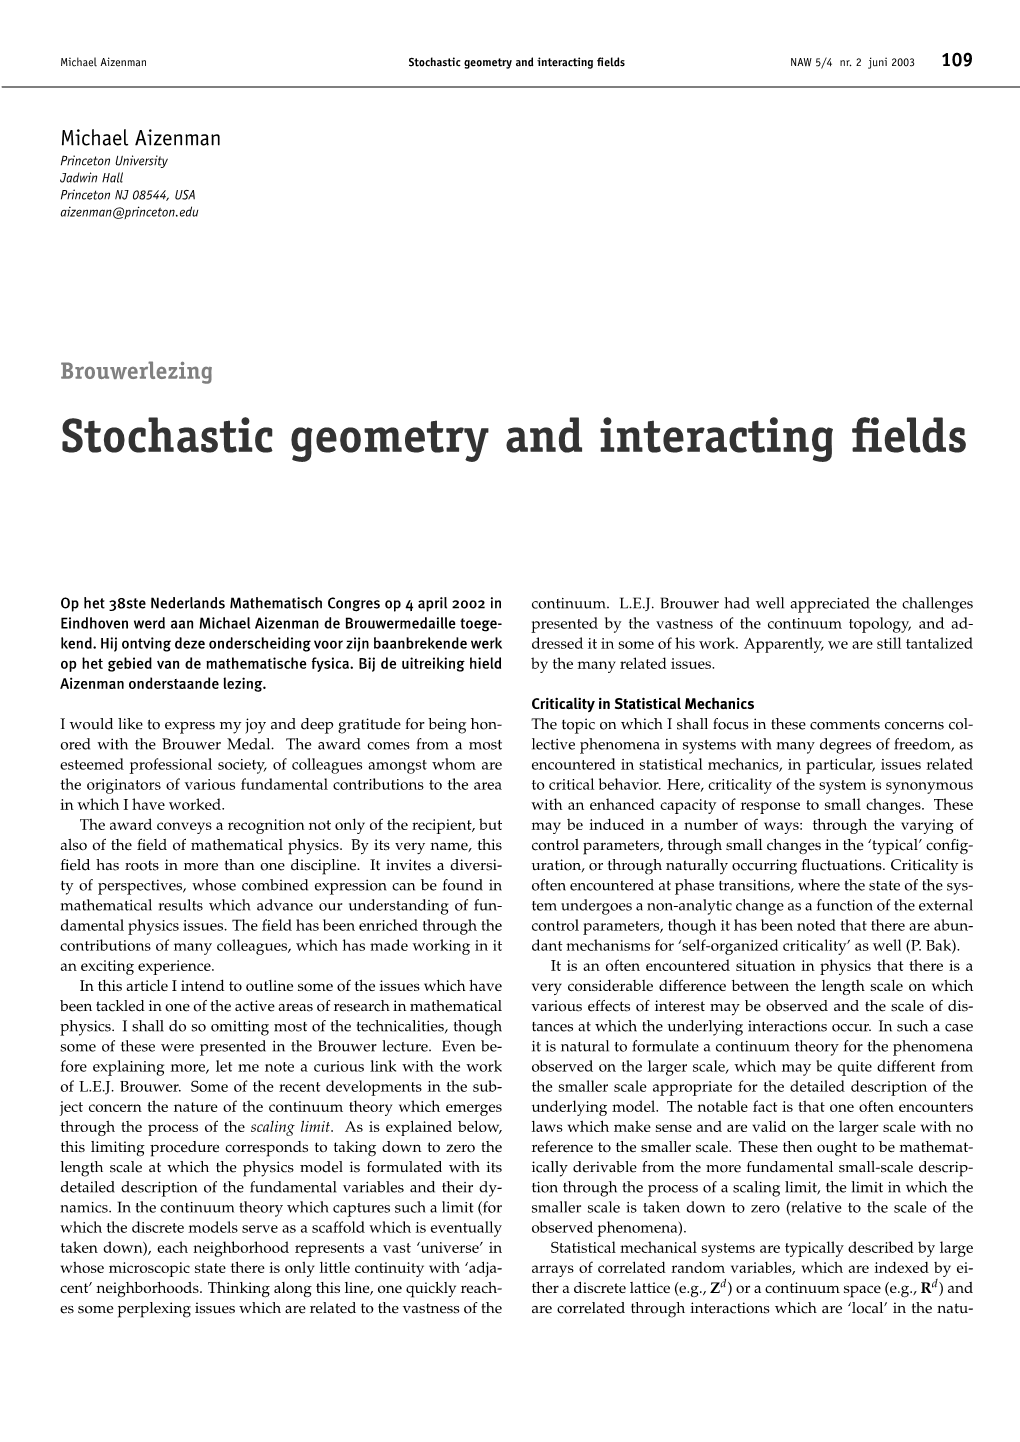 Stochastic Geometry and Interacting Fields